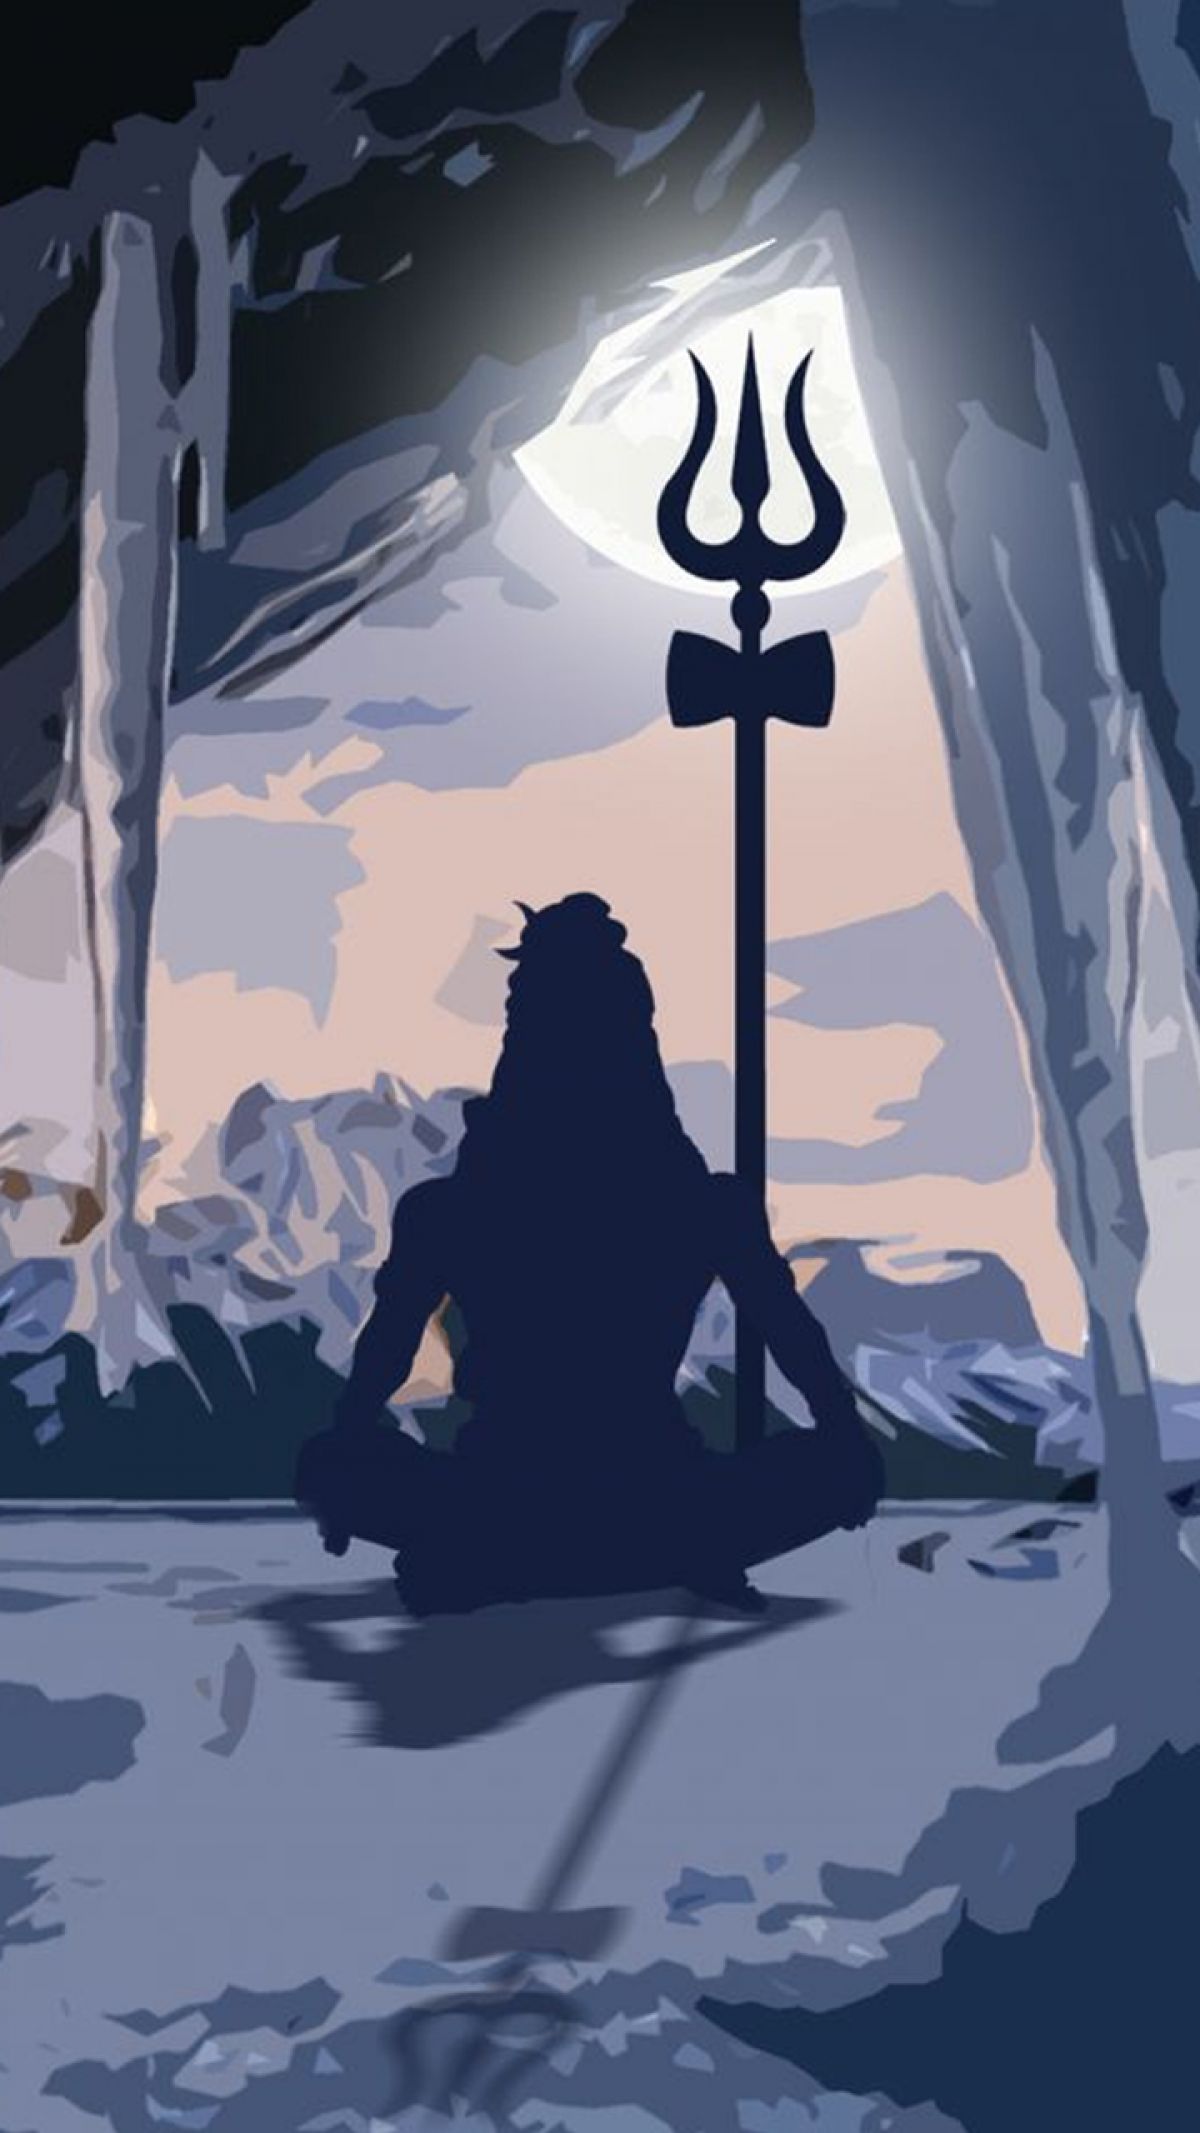 Discover Stunning Lord Shiva Images and Ultra HD Wallpapers - Free for  Commercial Use - Pixabay